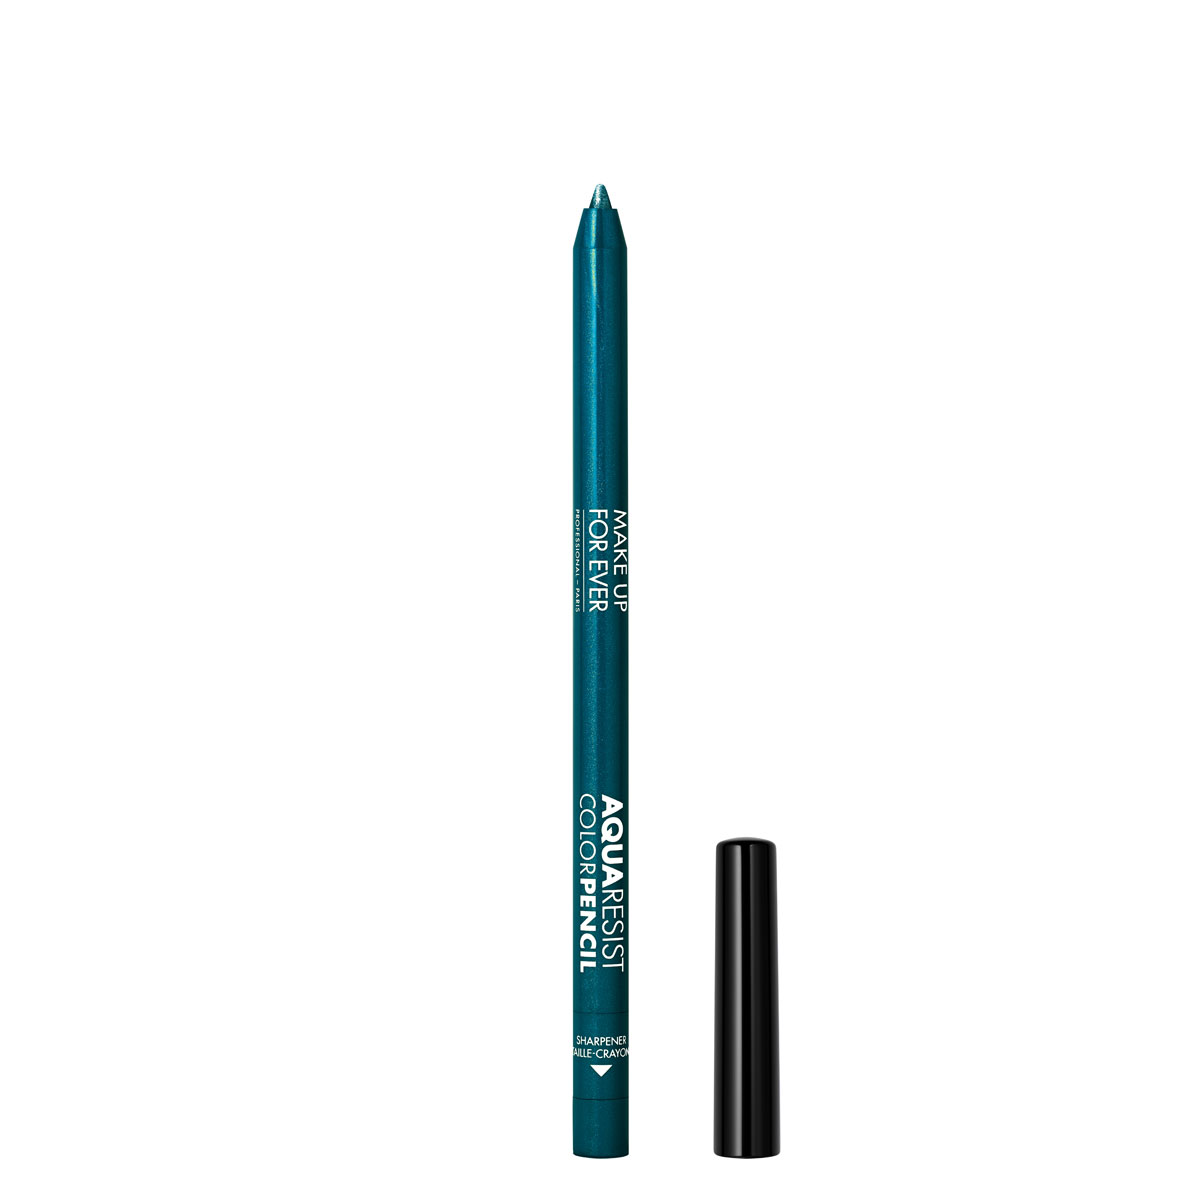 Make Up For Ever Aqua Resist Color Pencil Full Impact Glide Waterproof Eyeliner 07 Lagoon - Turquois